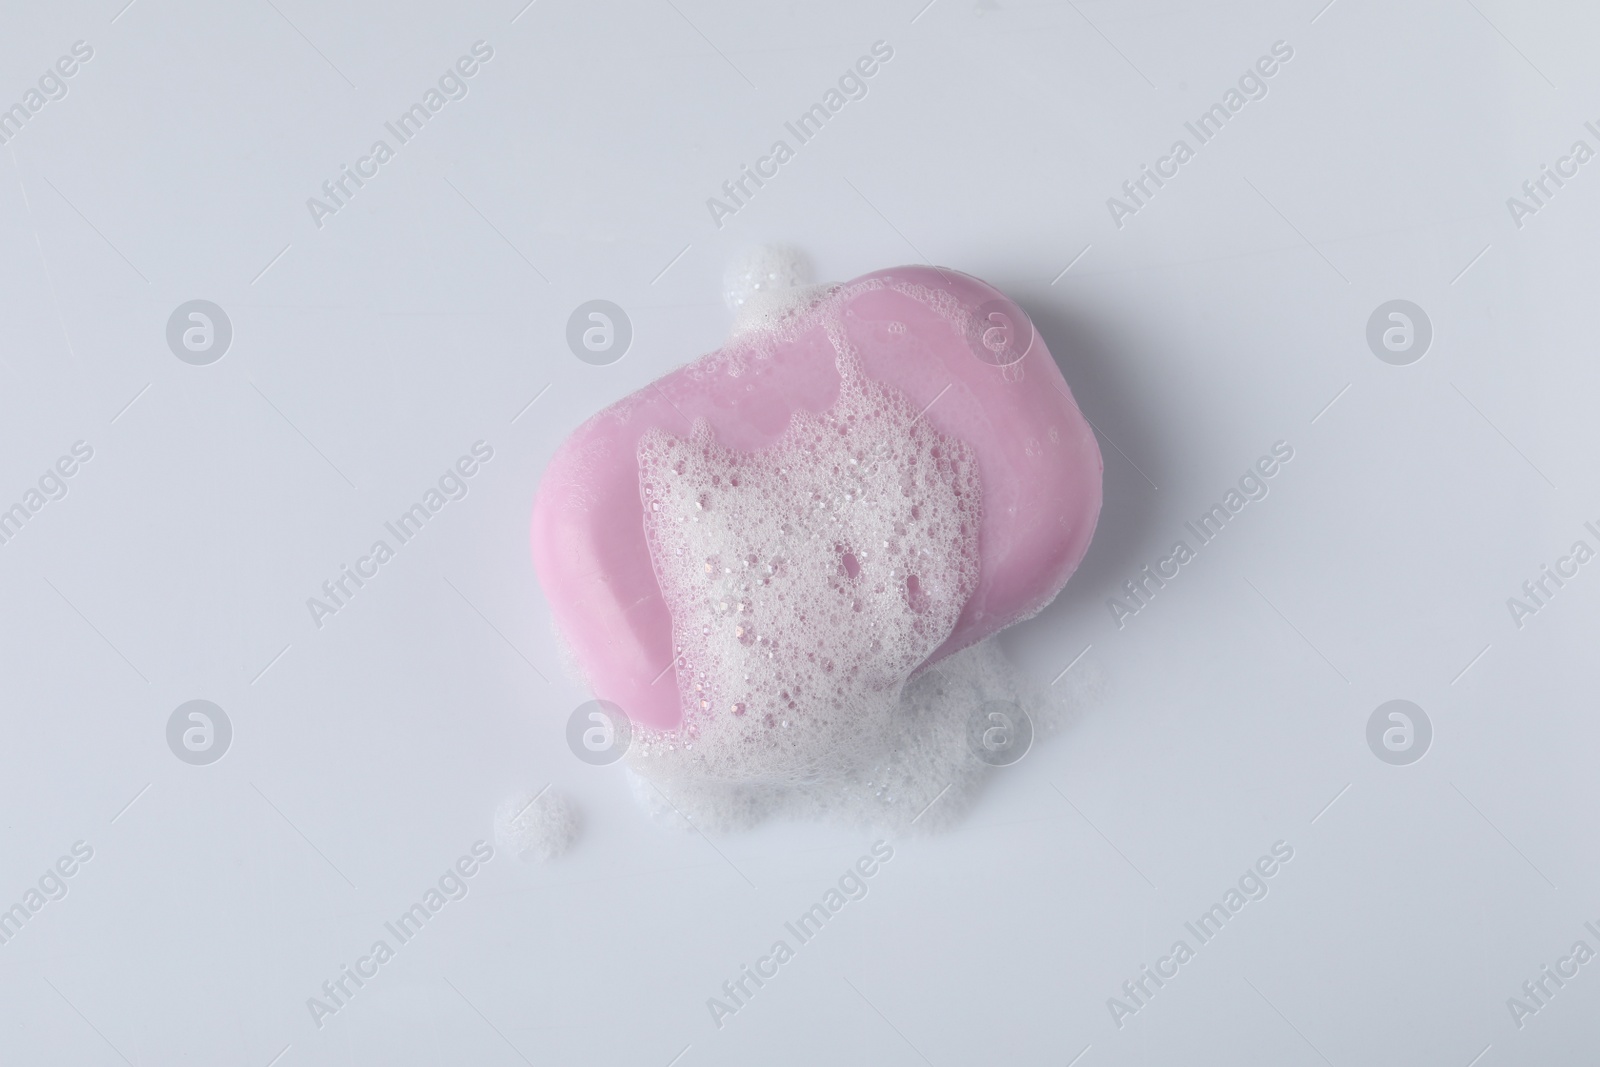 Photo of Soap with fluffy foam on white background, top view